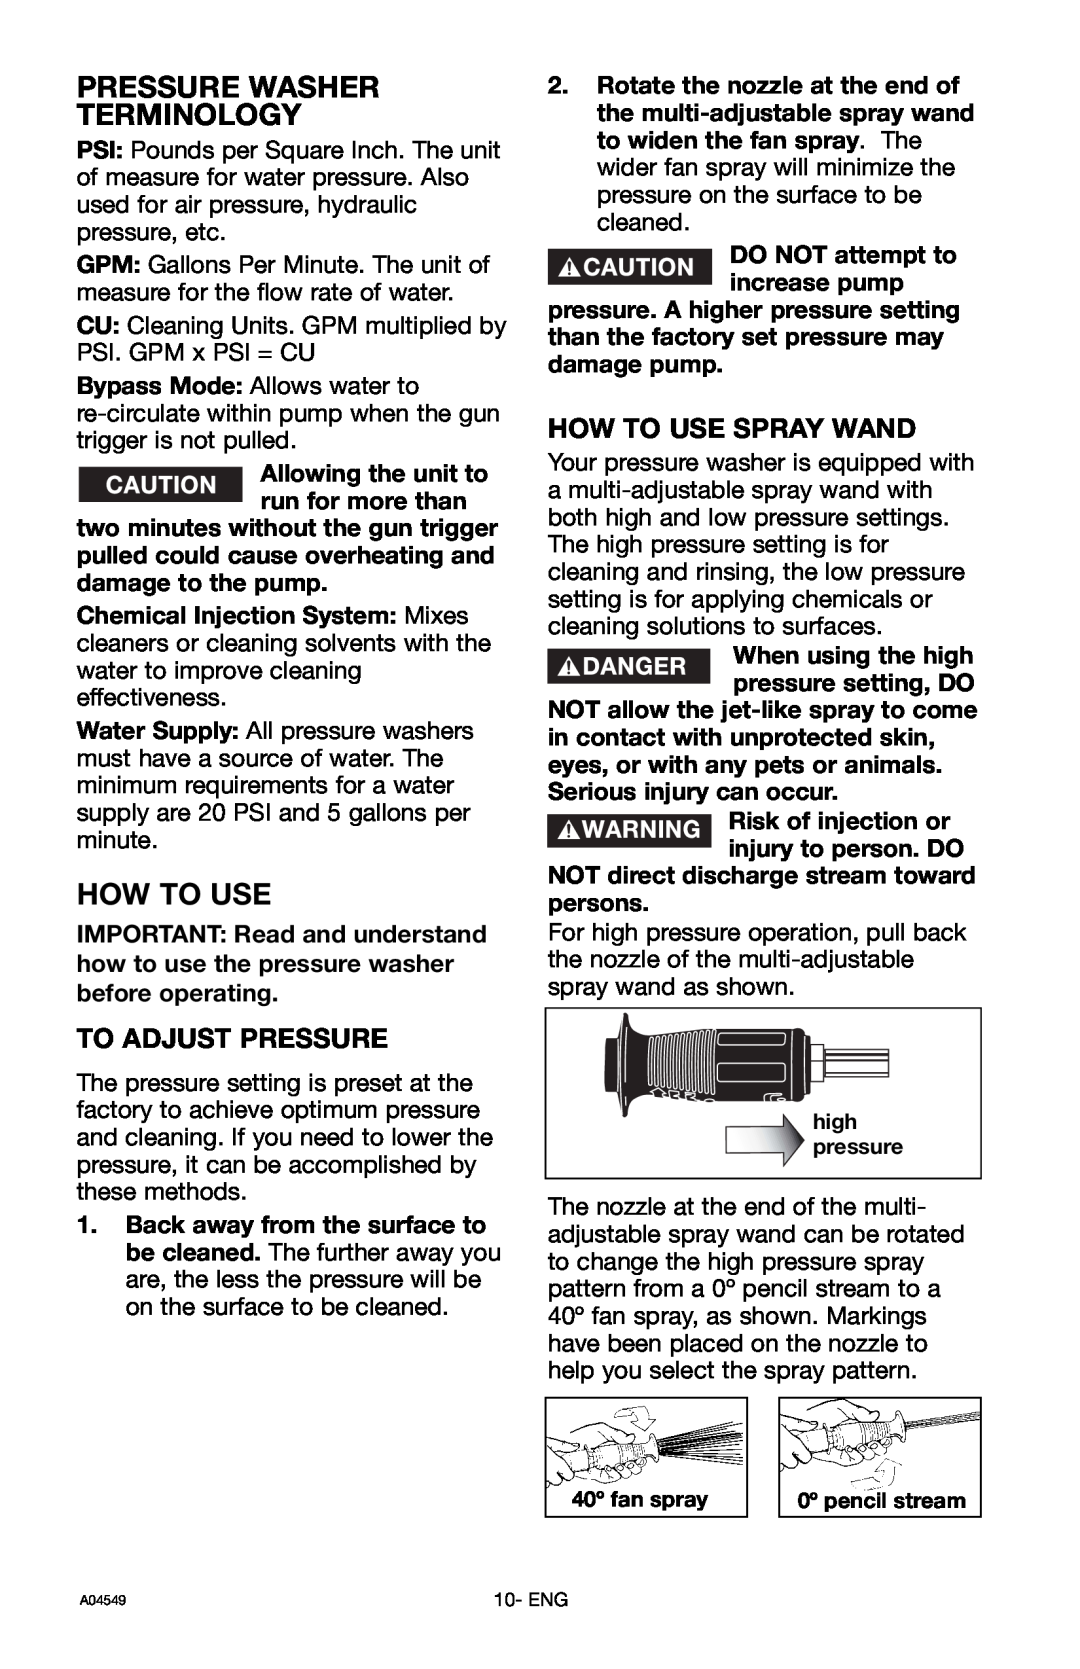 Craftsman 919.769063 owner manual Pressure Washer Terminology, To Adjust Pressure, How To Use Spray Wand 